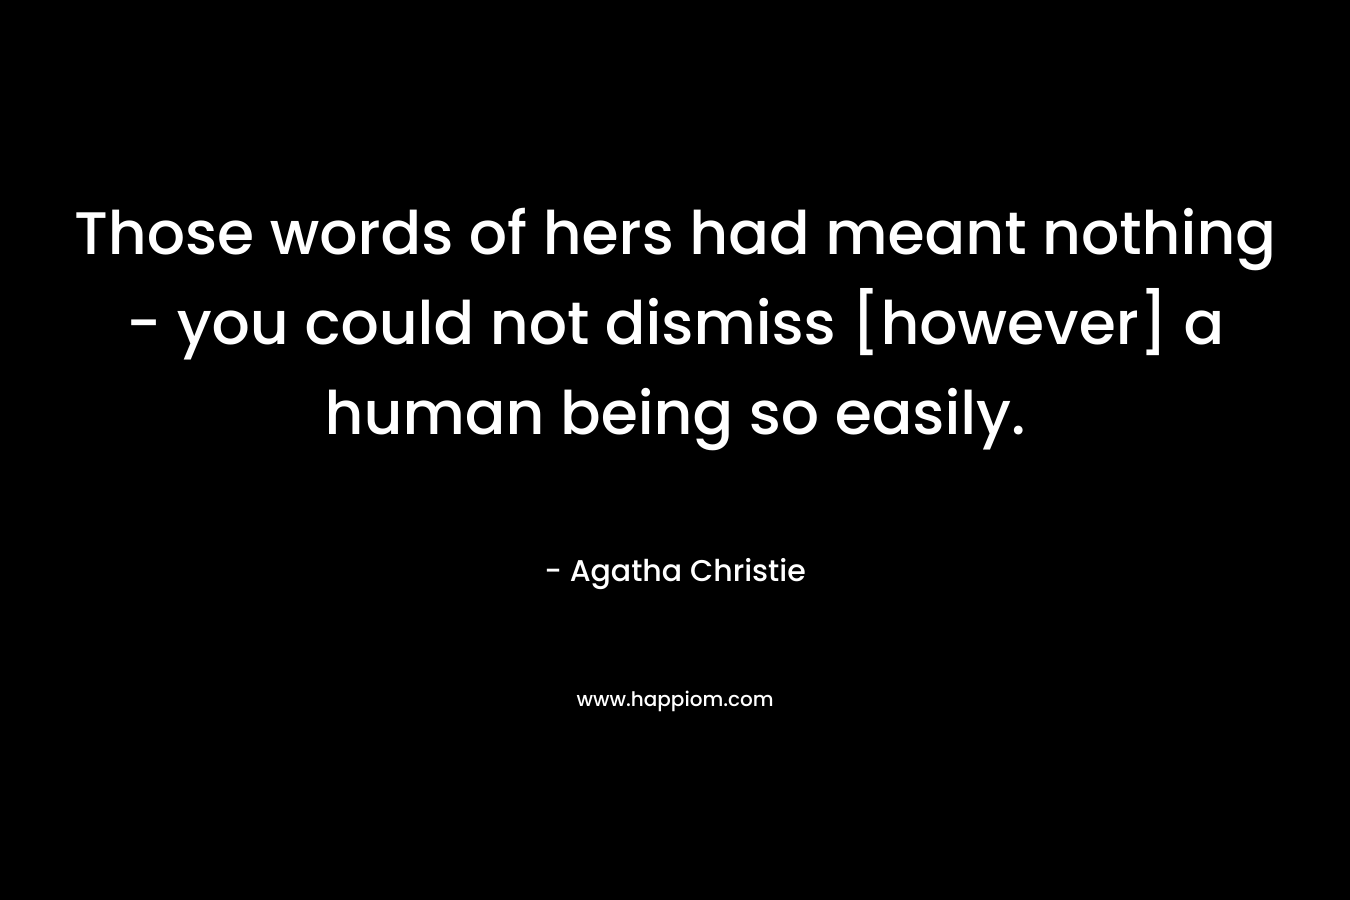 Those words of hers had meant nothing - you could not dismiss [however] a human being so easily.